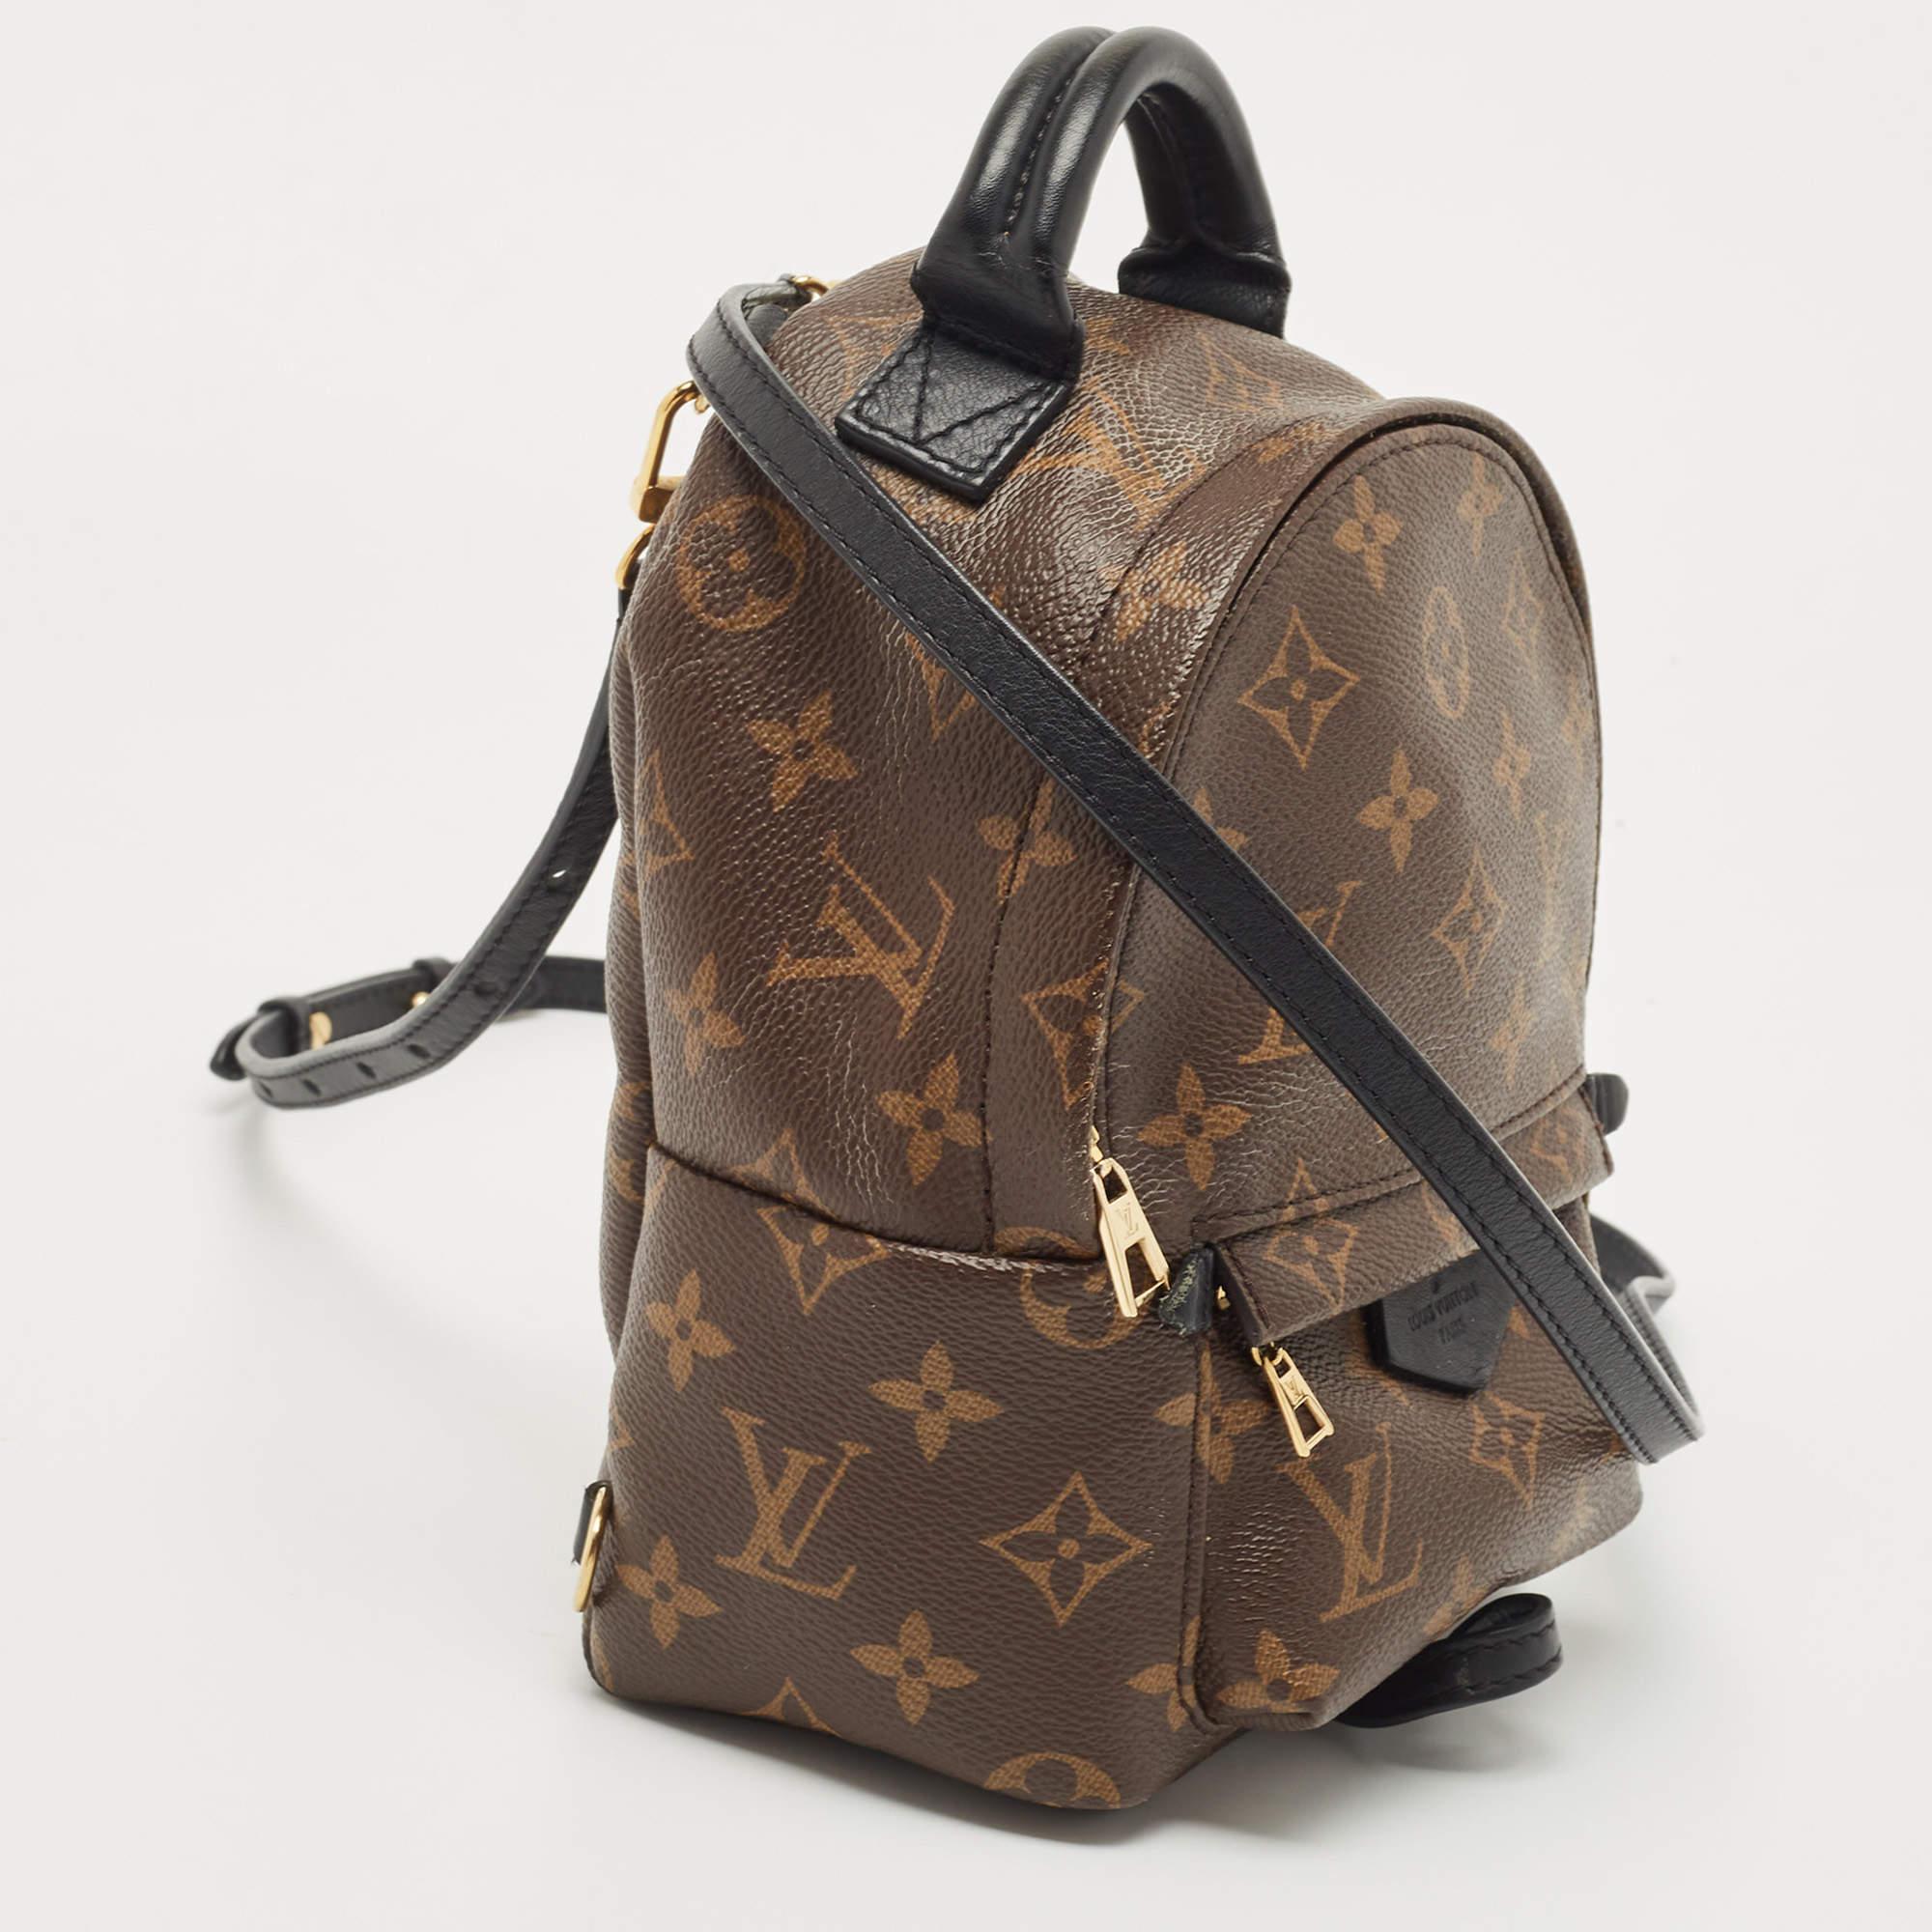 Trust this LV Mini Palm Springs backpack to be light, durable, and comfortable to carry. It is crafted beautifully using the best materials to be a durable style ally.

